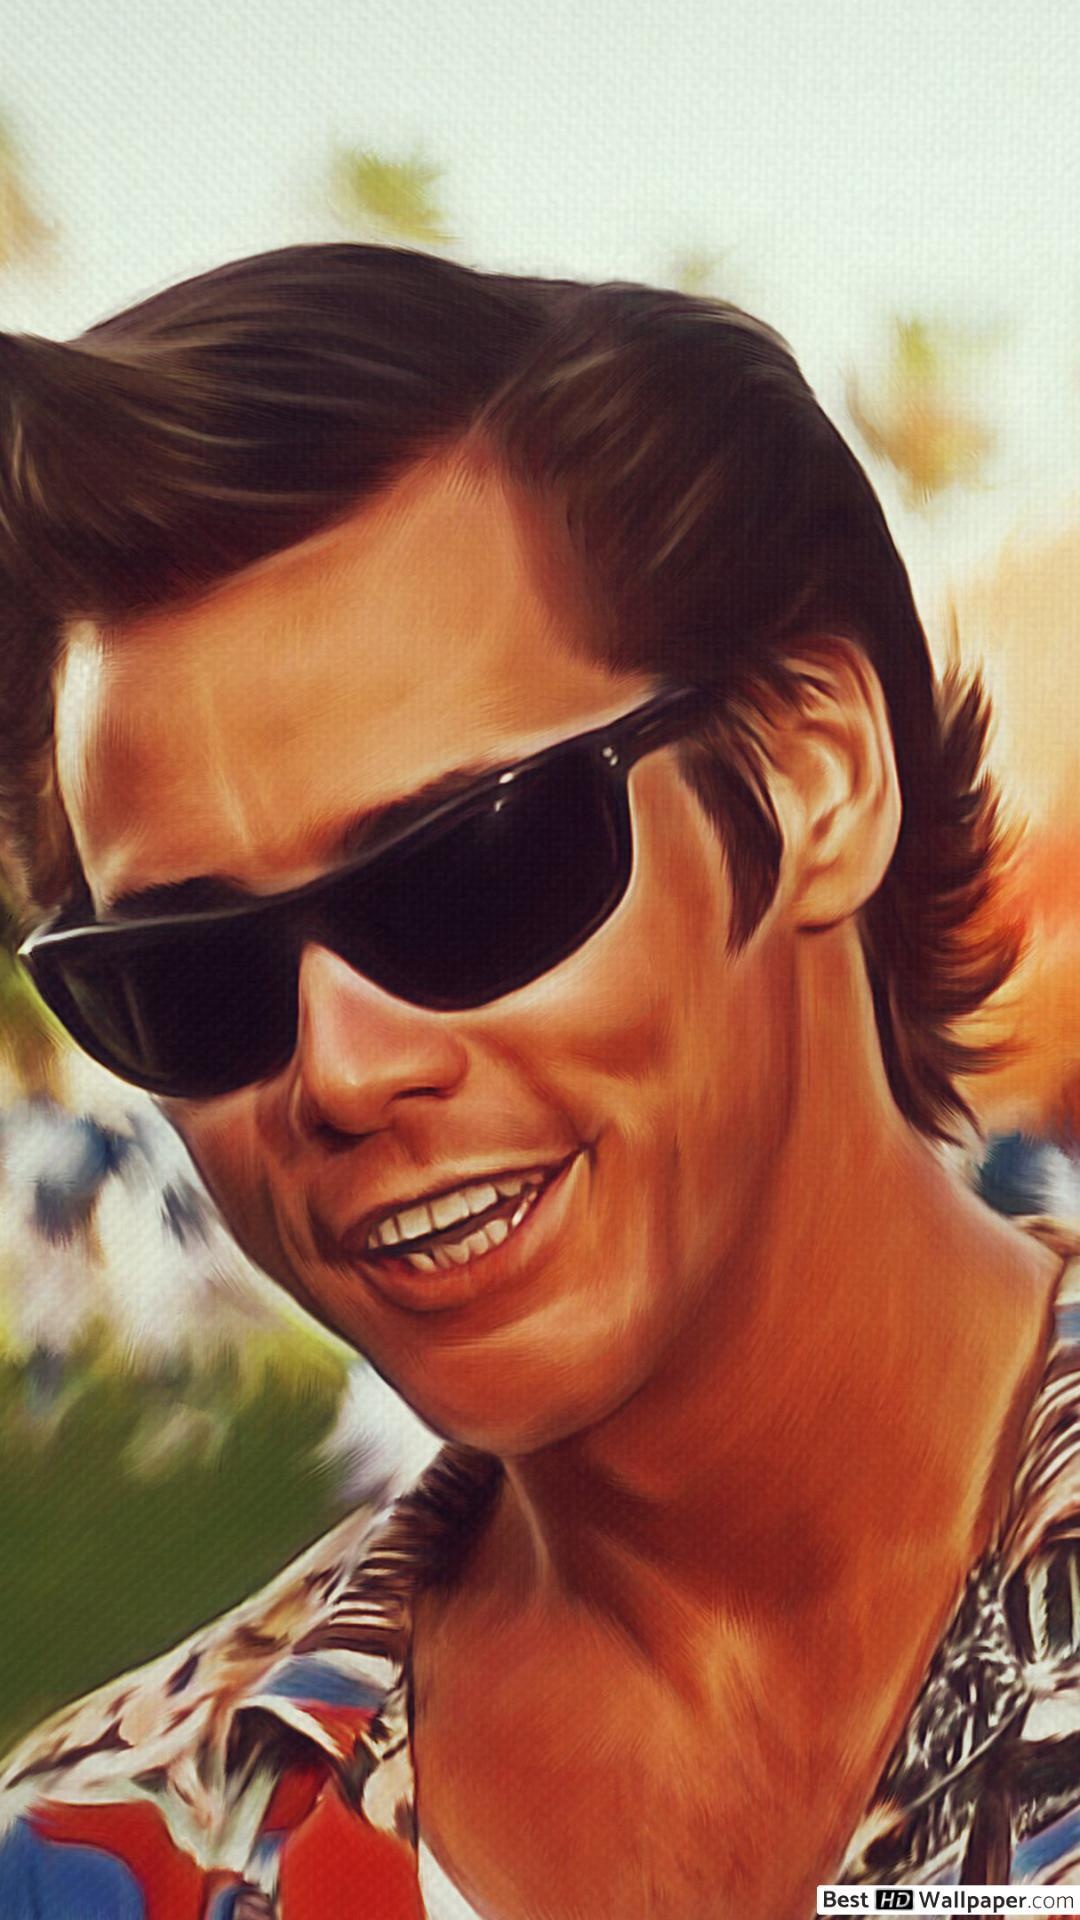 Ace Ventura: Jim Carrey, A zany private investigator who specializes in finding missing animals. 1080x1920 Full HD Wallpaper.